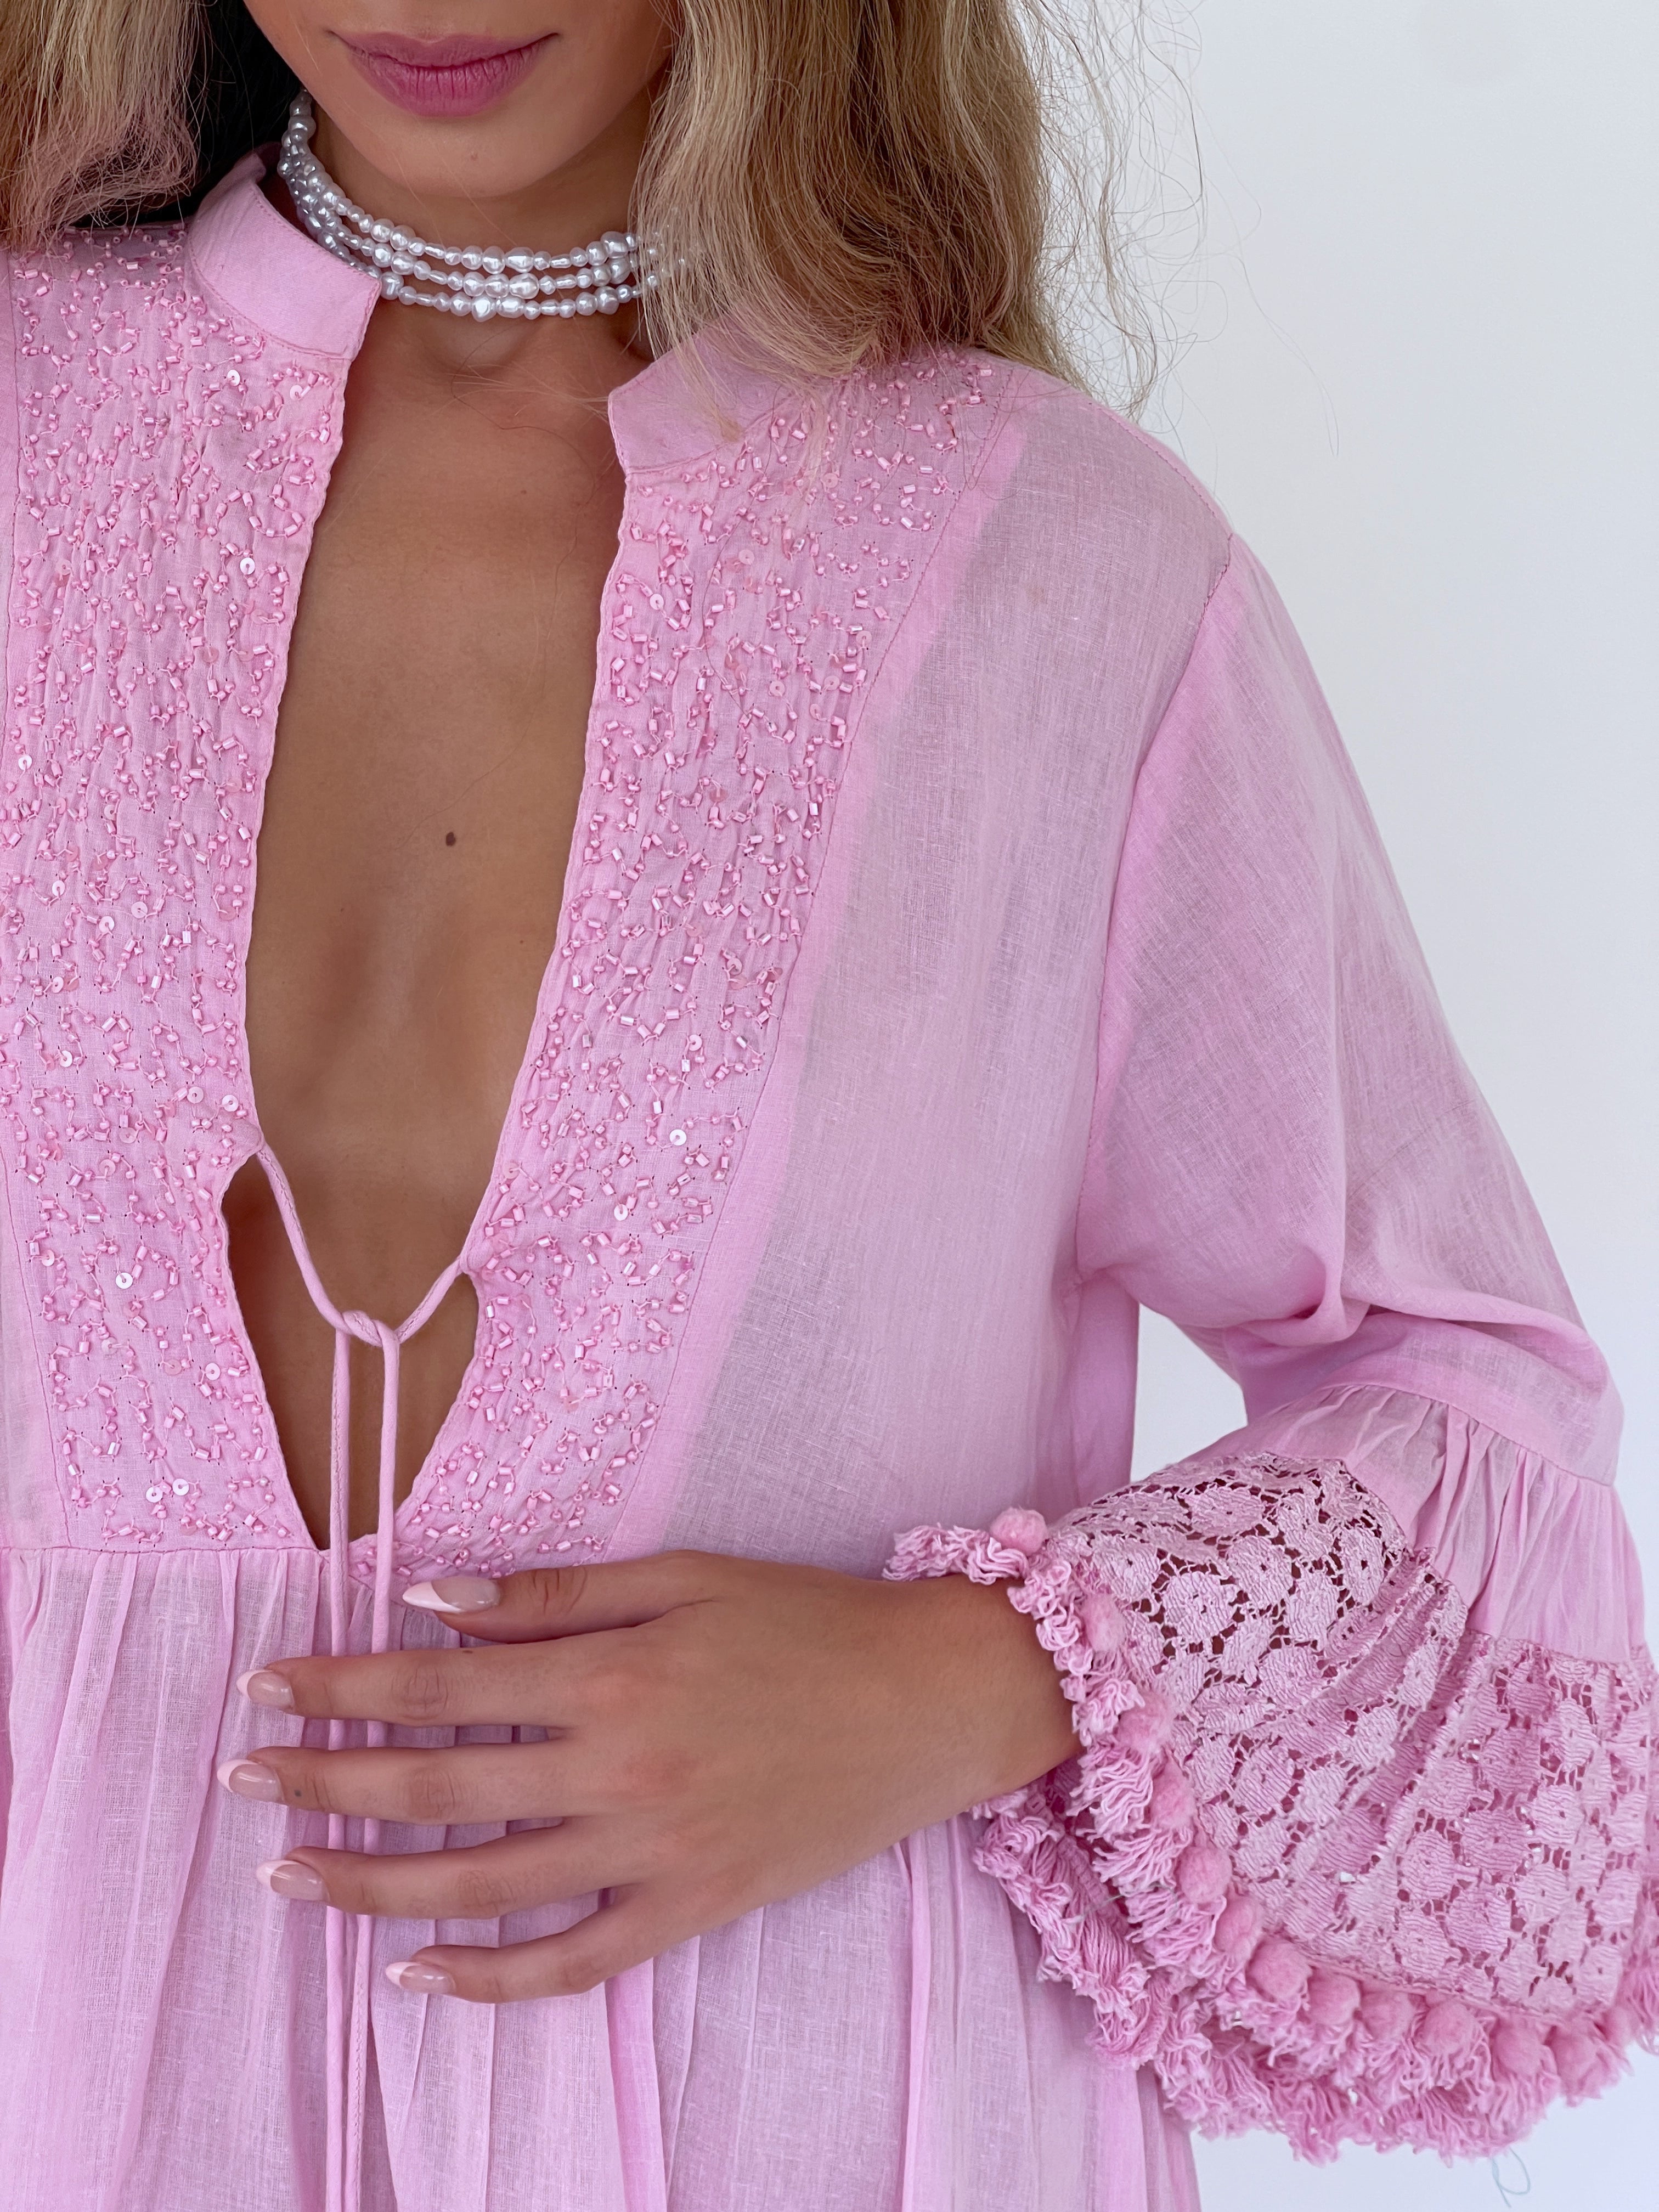 PINK DRESS WITH LACE AND BEADS DETAILS